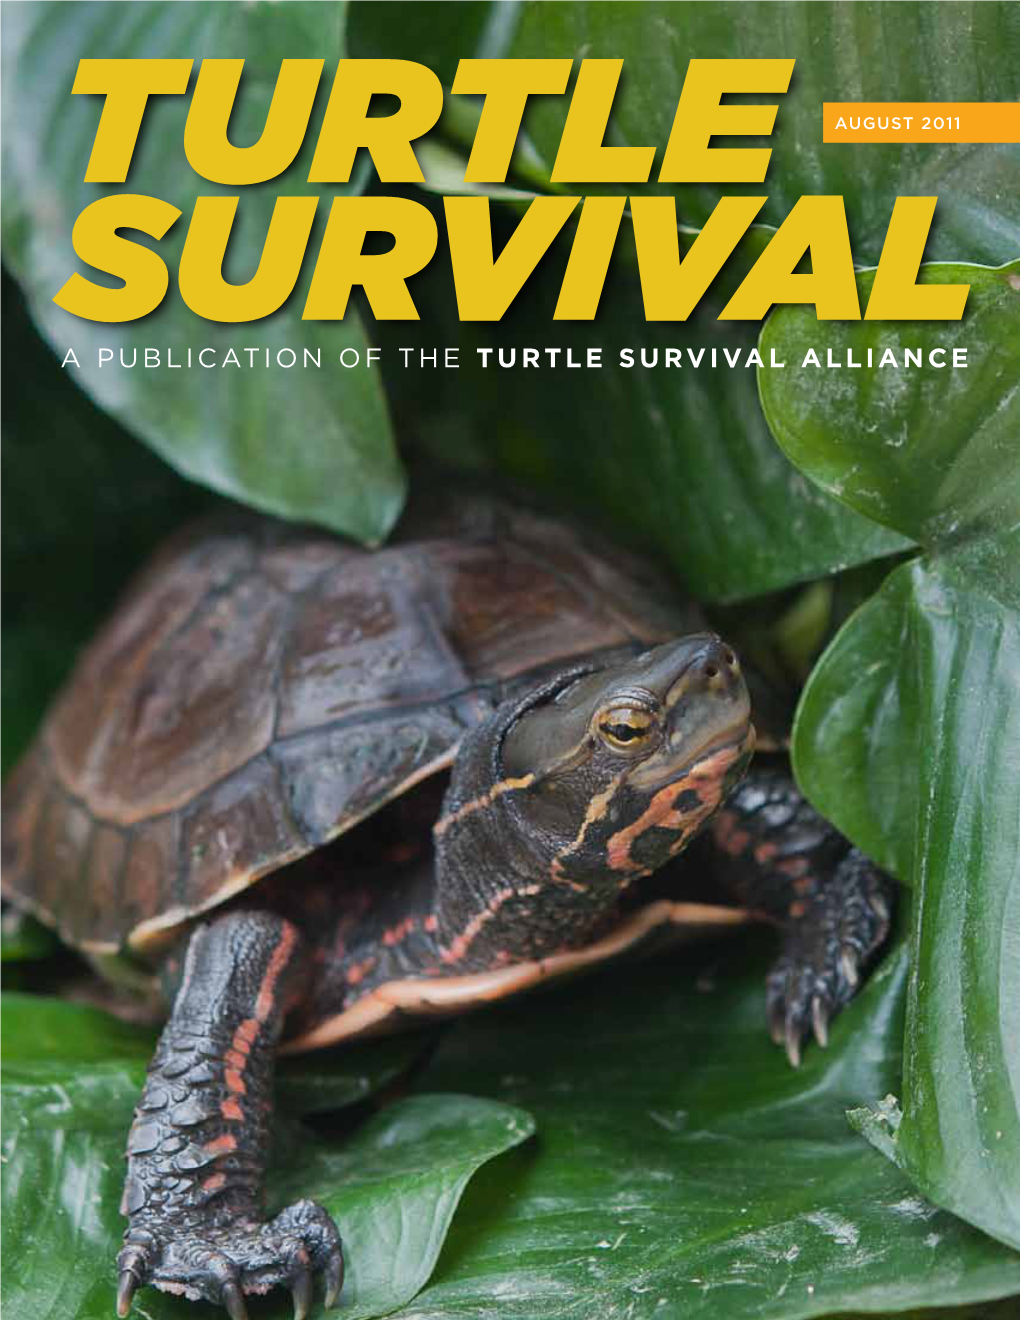 A Publication of the Turtle Survival Alliance Rick Hudson from the President’S Desk New People, New Facilities, New Programs: a Year of Remarkable Growth for the TSA